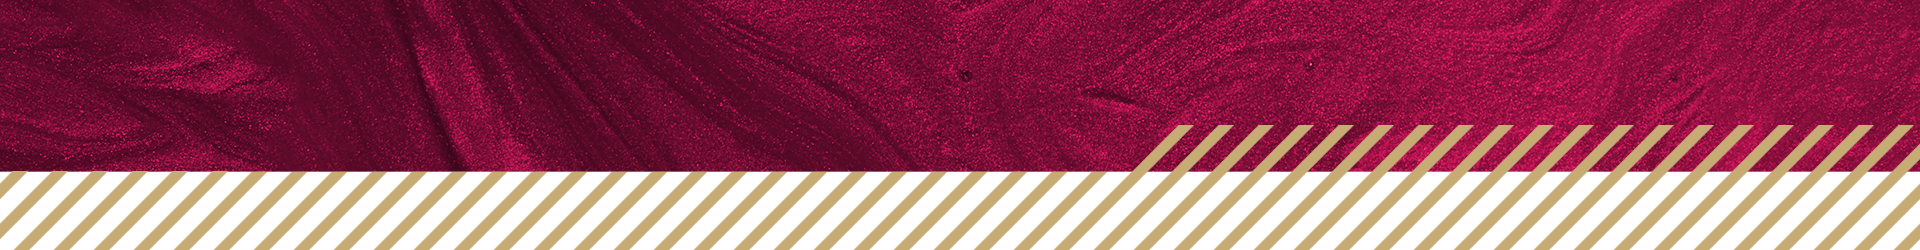 Marbled burgundy paint and diagonal gold stripes